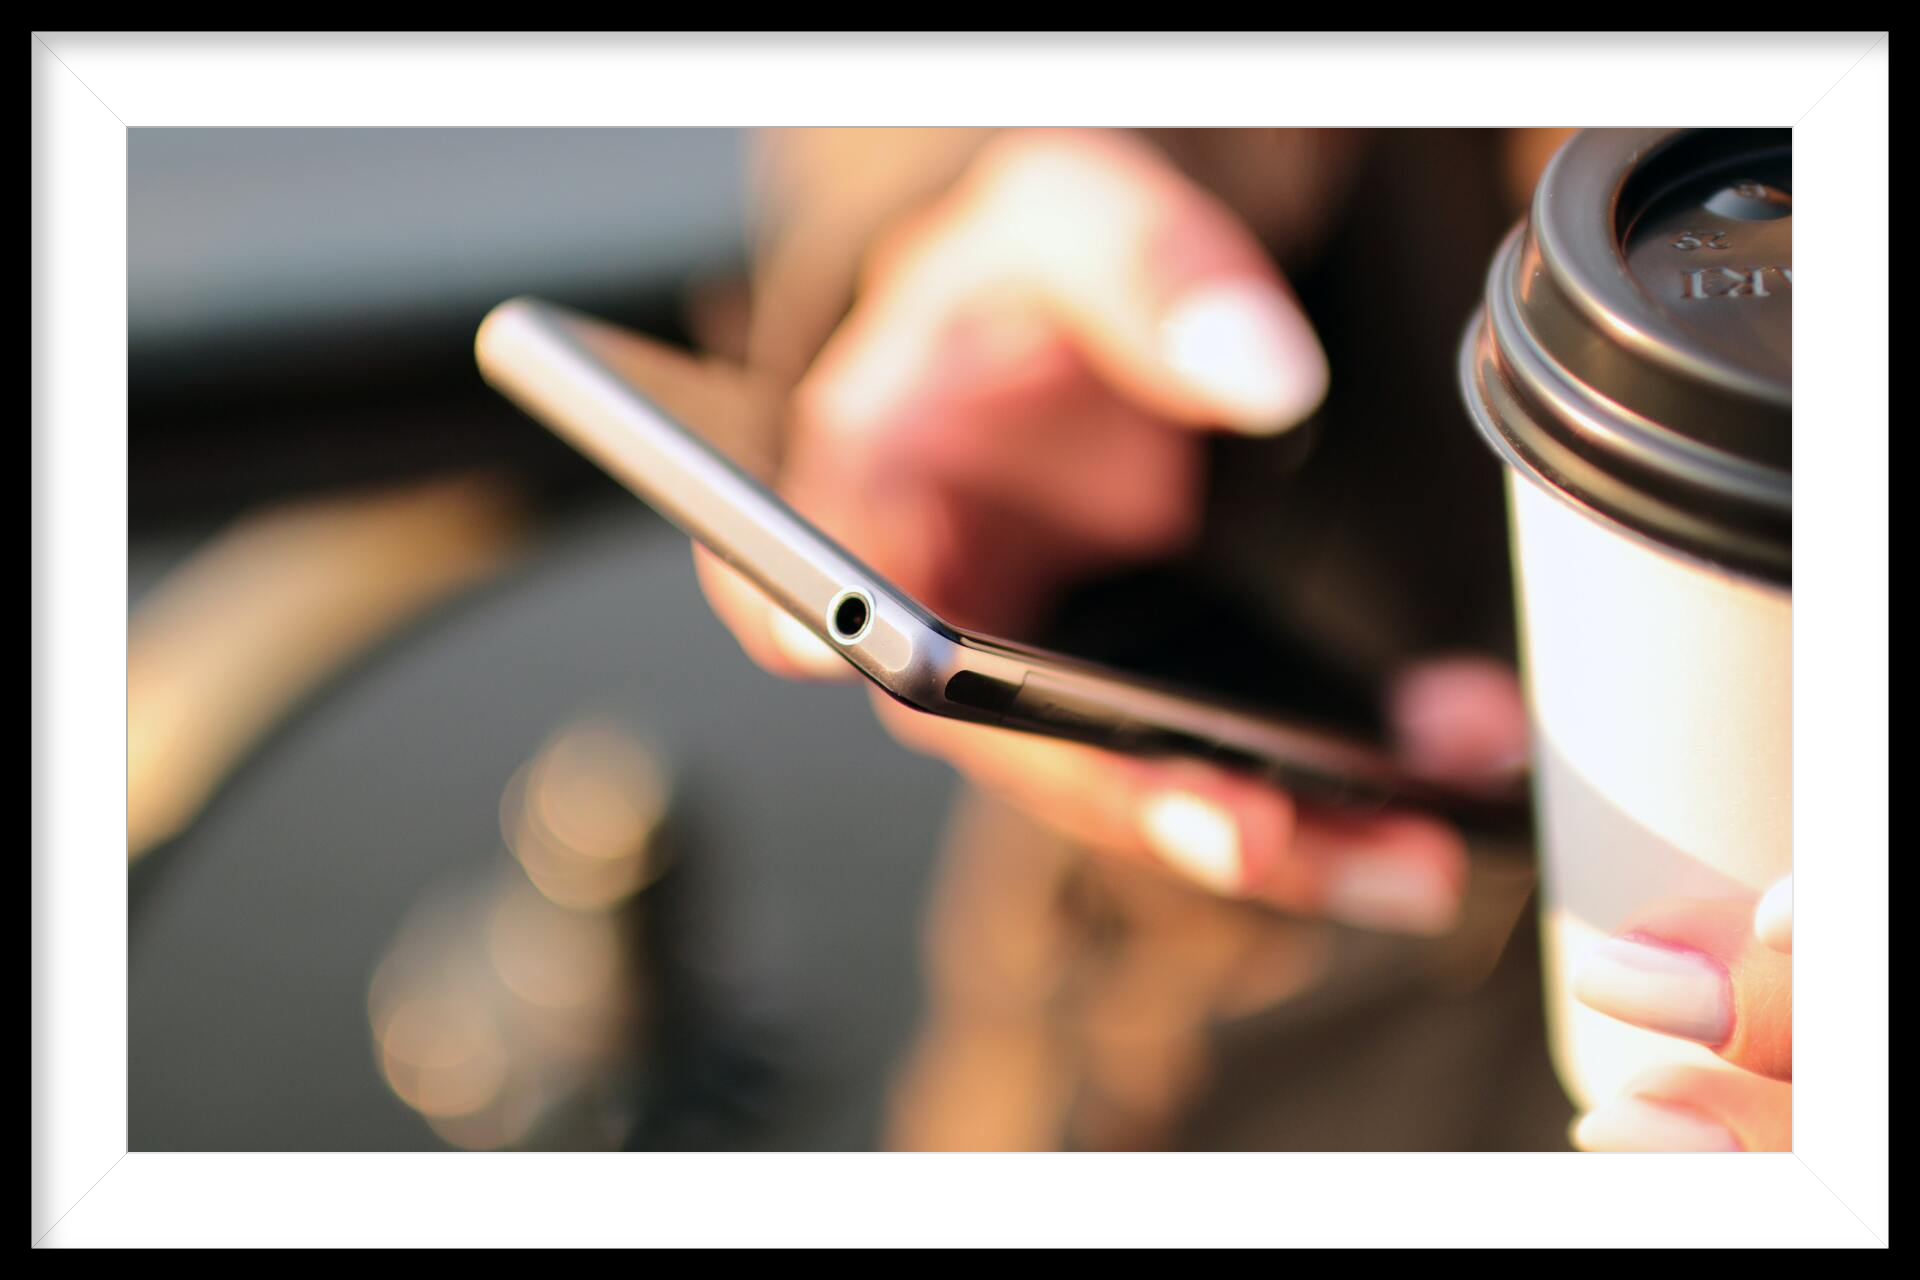 a person is holding a cup of coffee and using a cell phone